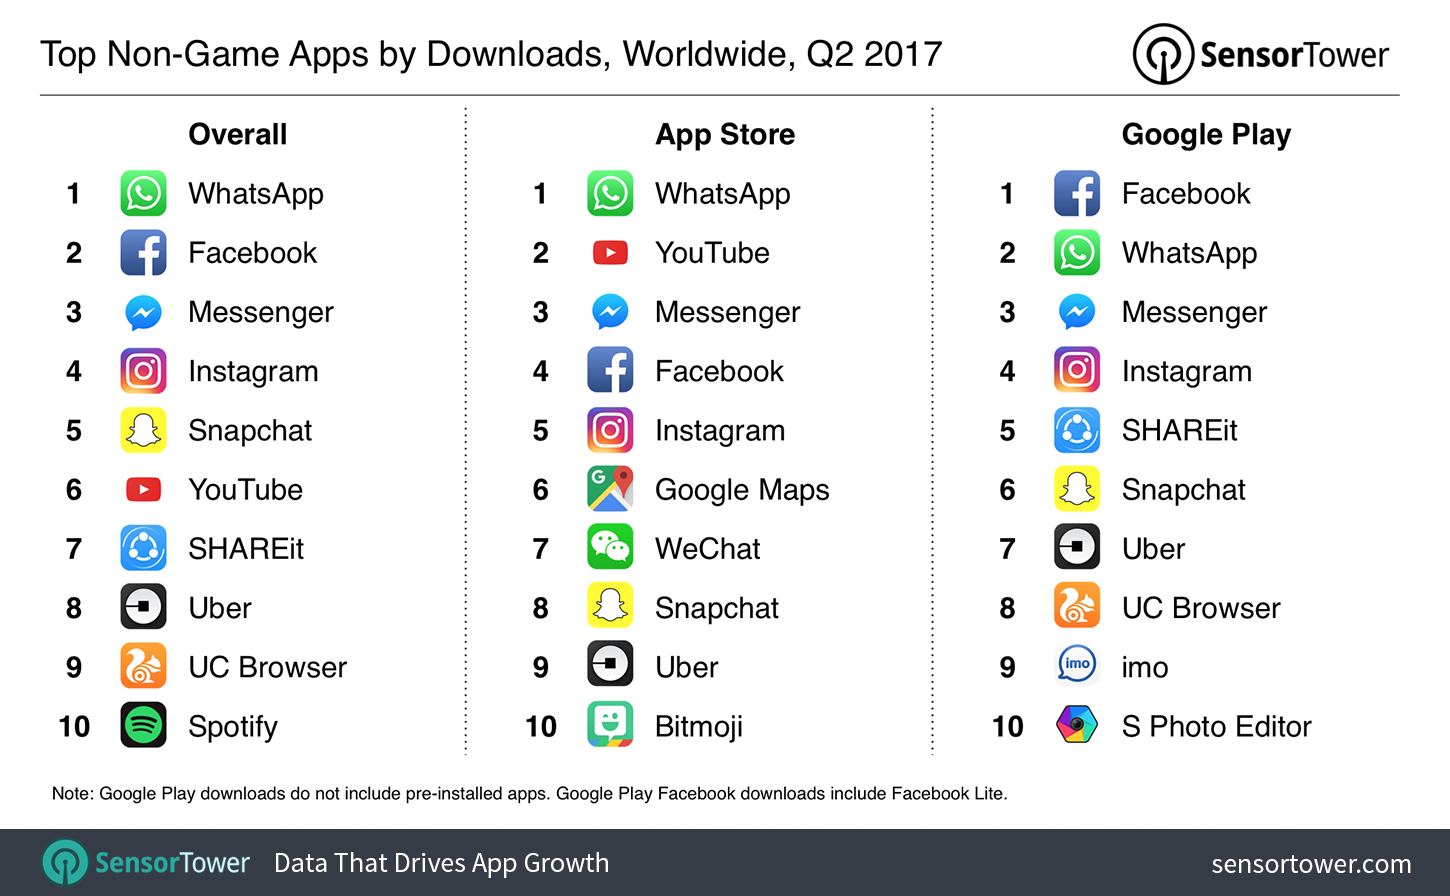 Q2 2017's Top Mobile Apps by Worldwide Downloads